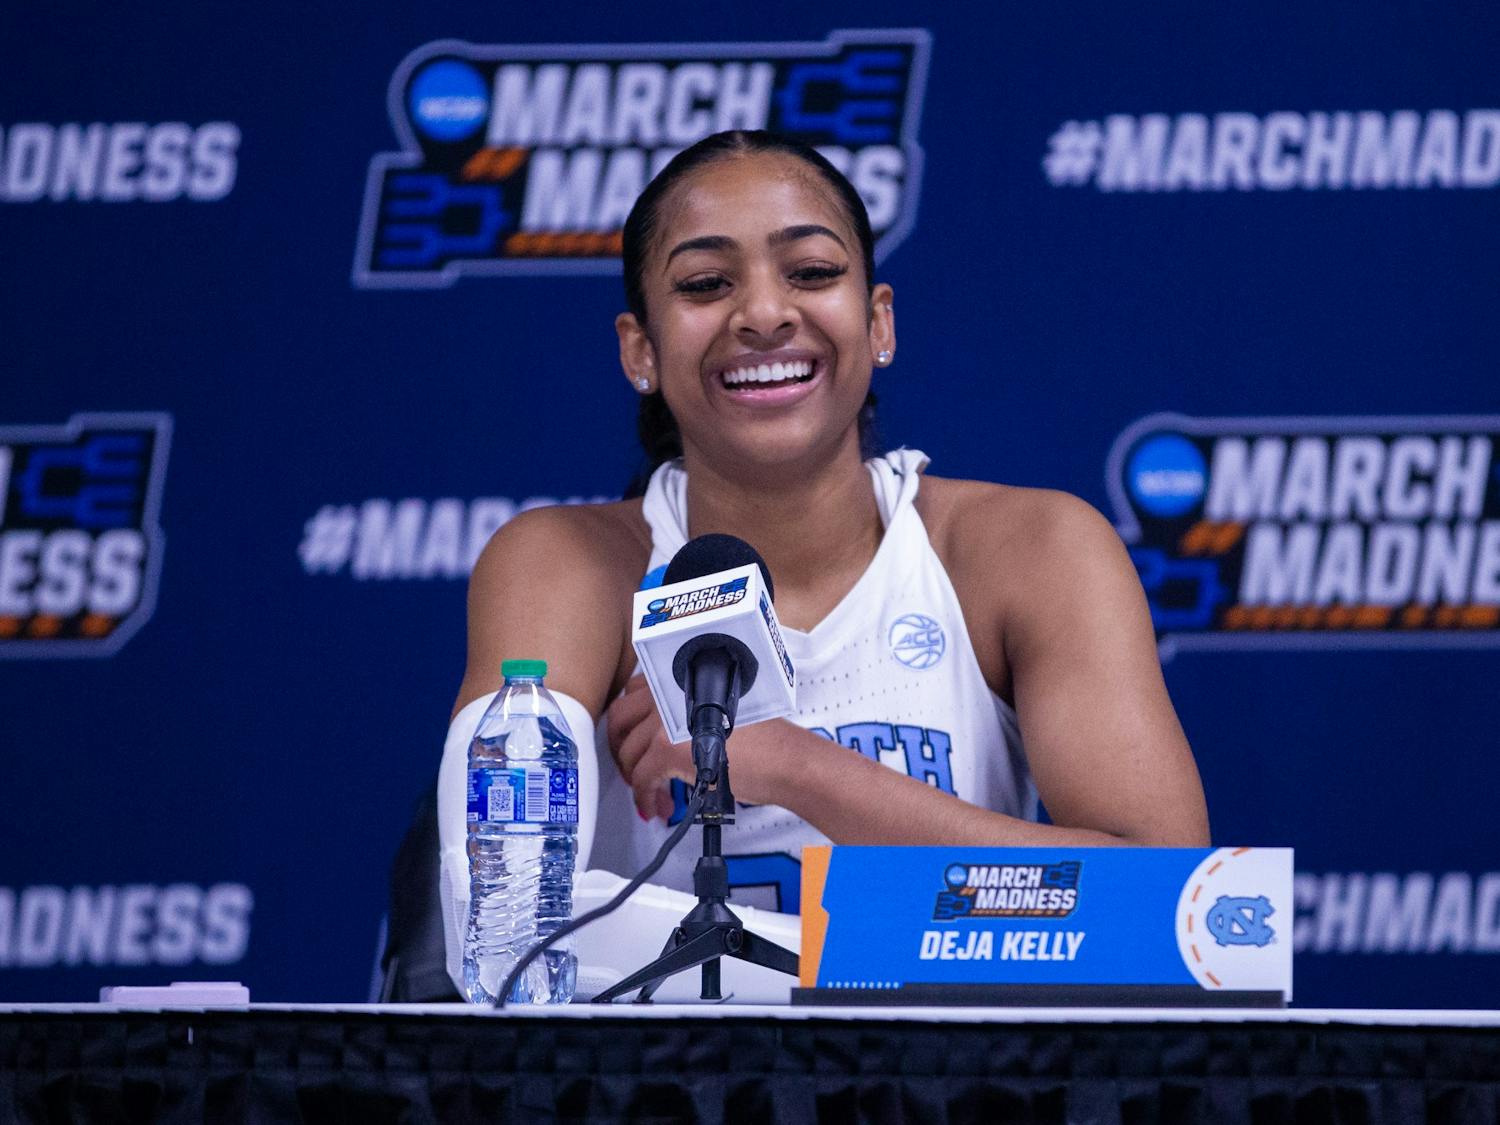 UNC junior guard Deja Kelly (25) speaks during a press conference after the women's basketball game against St. John's during the first round of the NCAA Women's Basketball Tournament at the Schottenstein Center in Columbus, Ohio on Saturday, March 18, 2023. UNC beat St. John's 61-59.